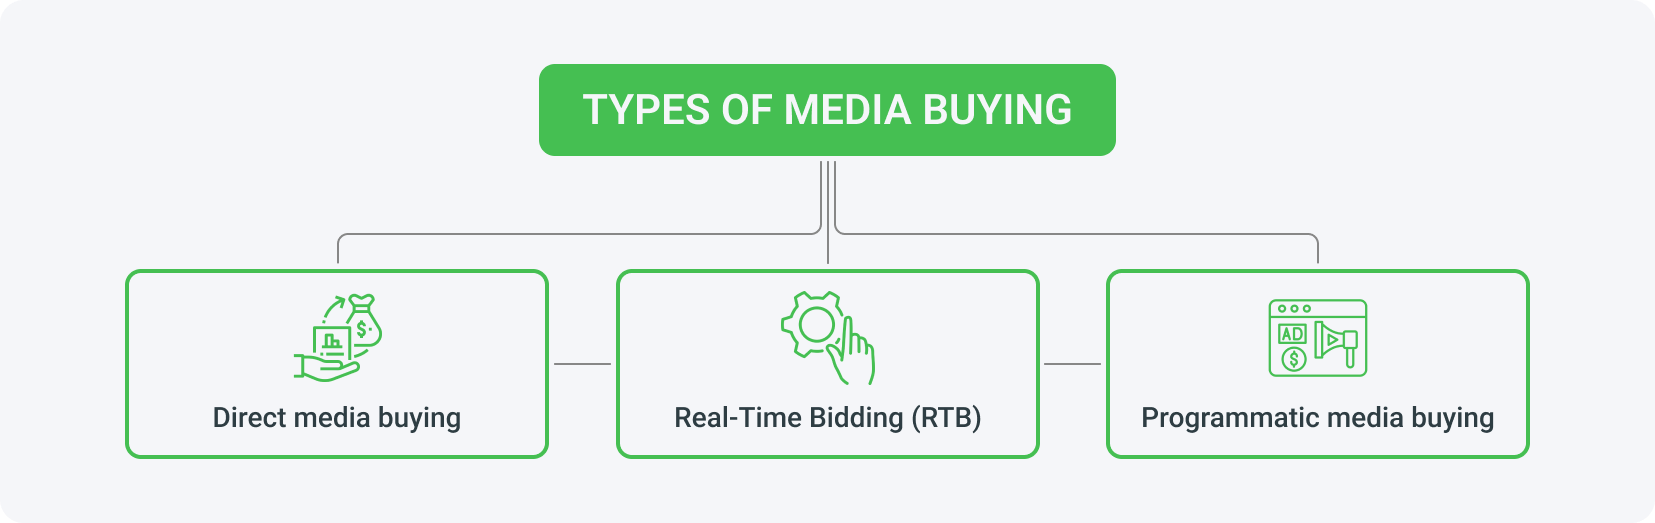 Media buying can be divided into direct, real-time bidding, and programmatic.